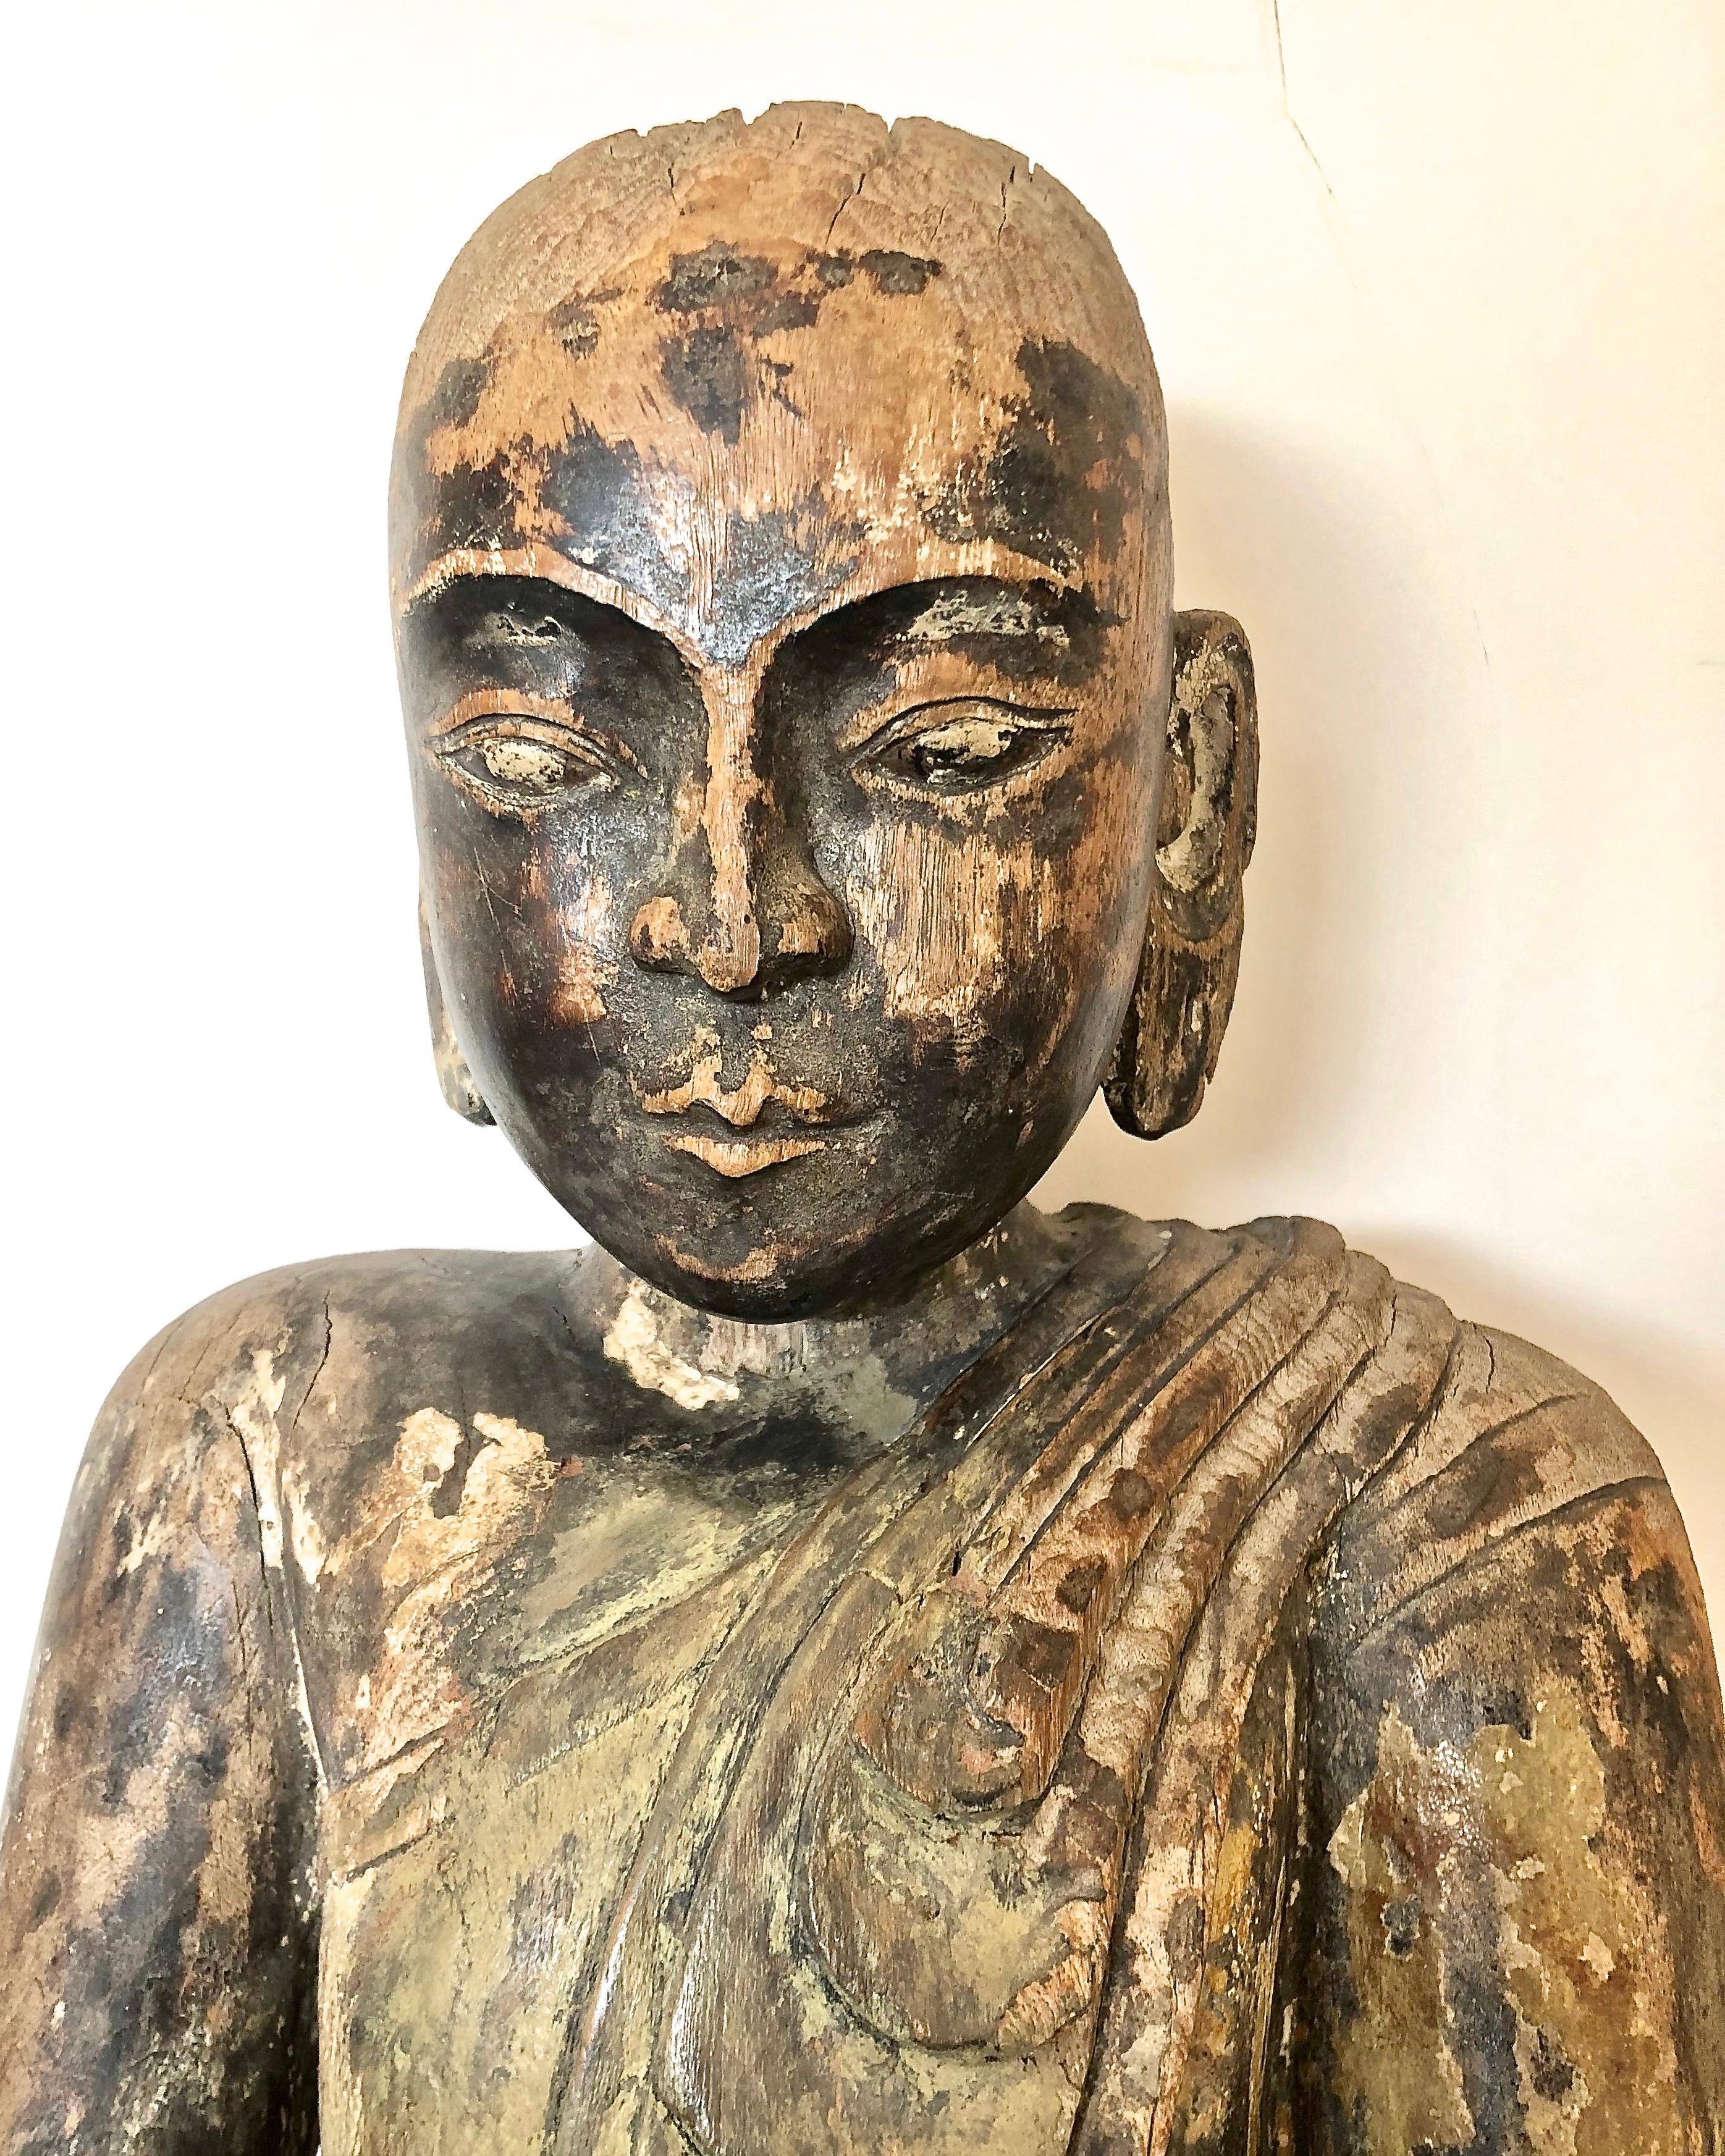 Antique Asian Wood Carving of a Buddhist Monk.
 Early 18Th Century or older possibly Burmese, Buddhist Monk resting on a lotus blossom on wood base, weather distressed, cracks, and loss of paint. 